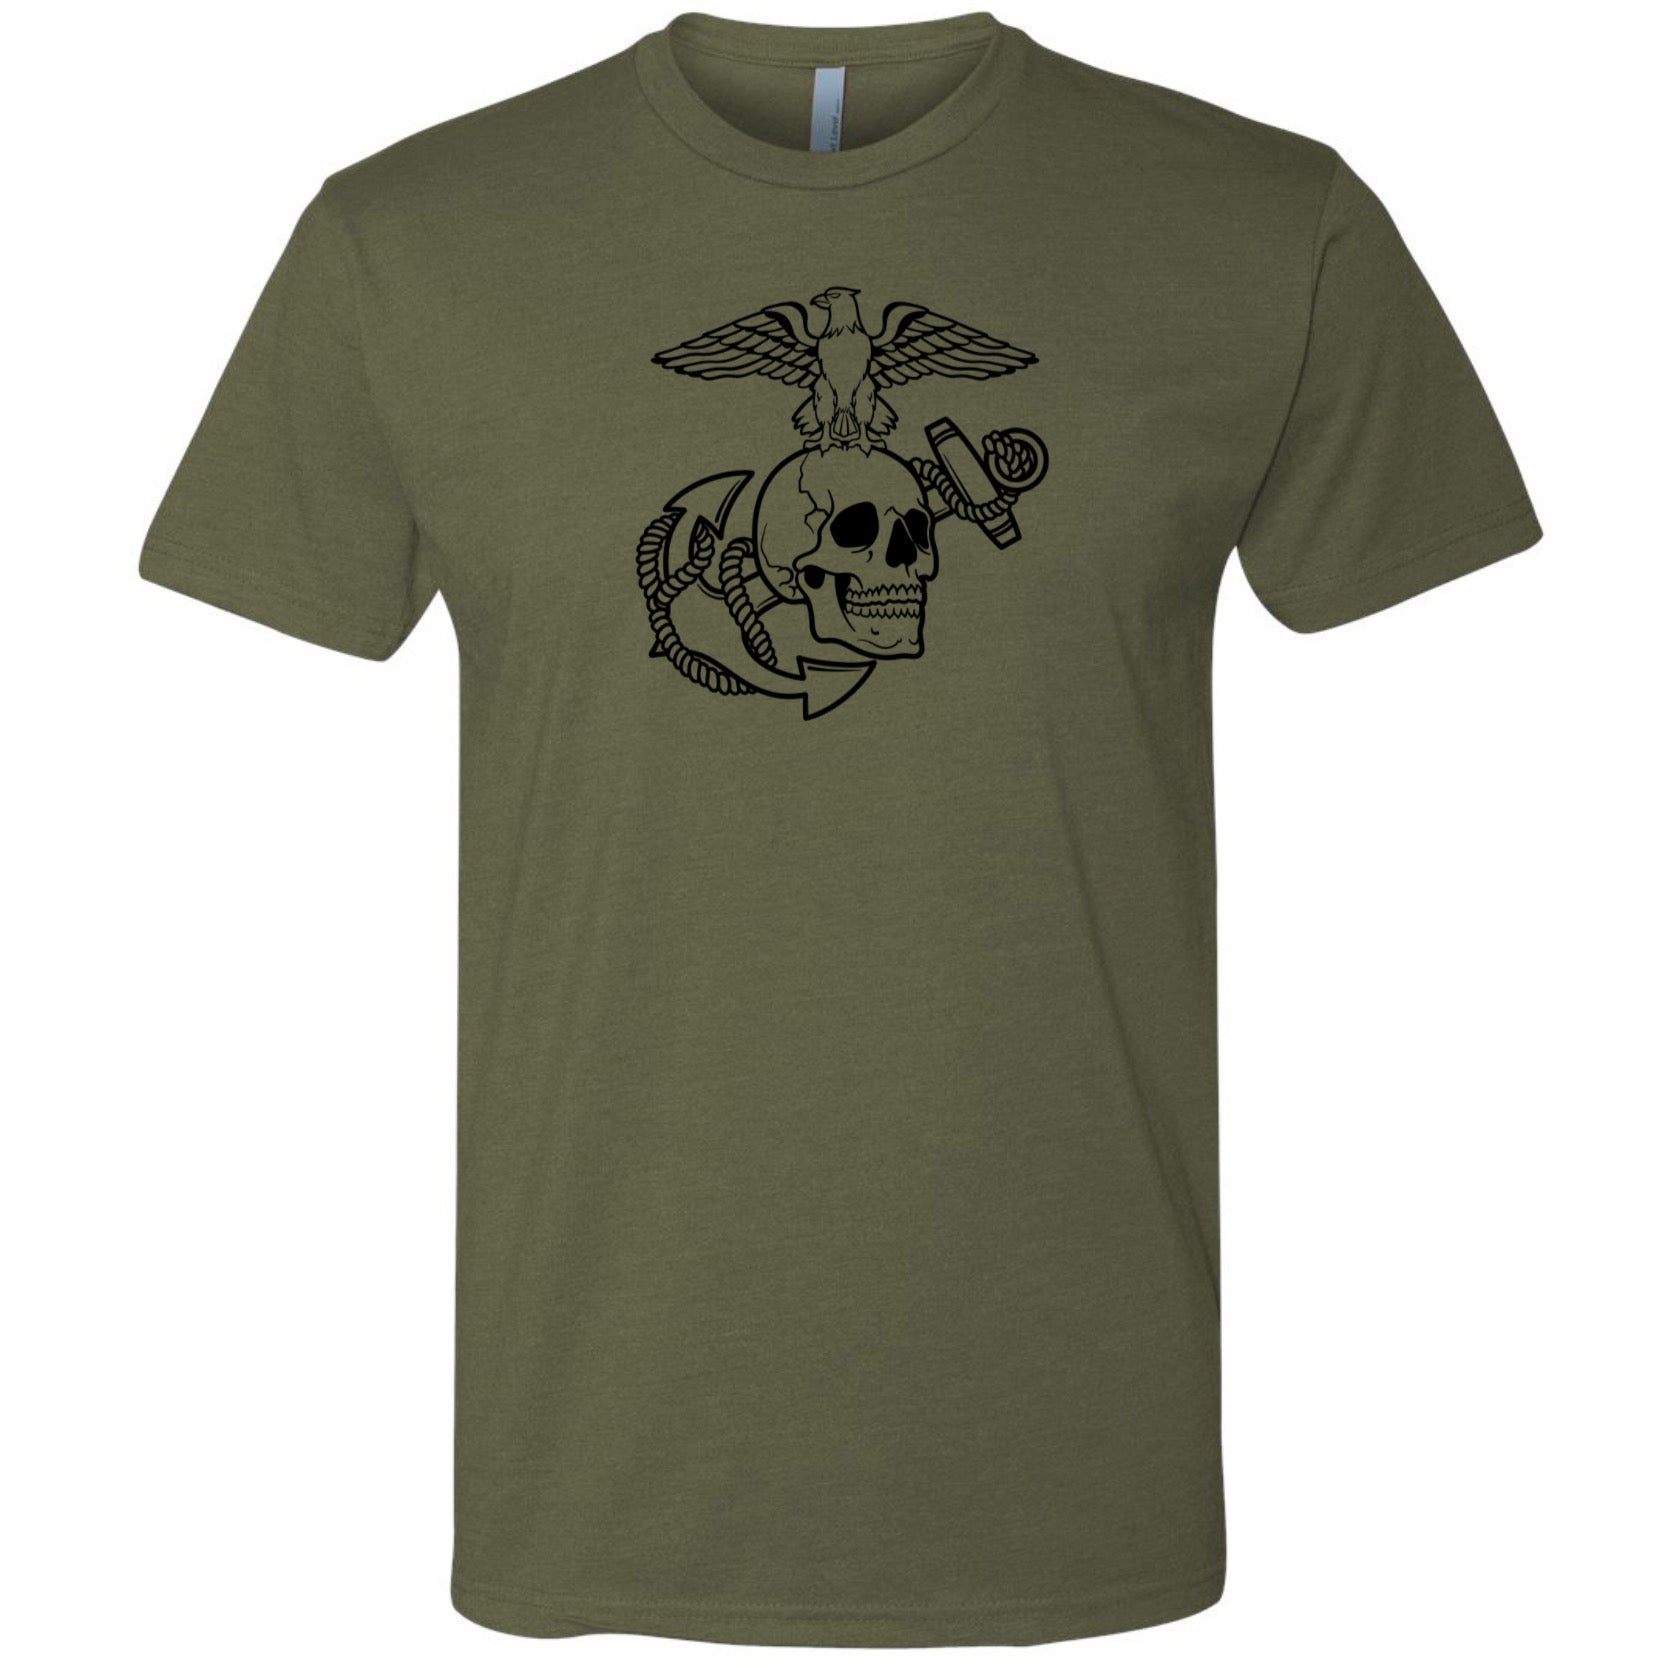 Eagle, Skull and Anchor Tee – Goons Up